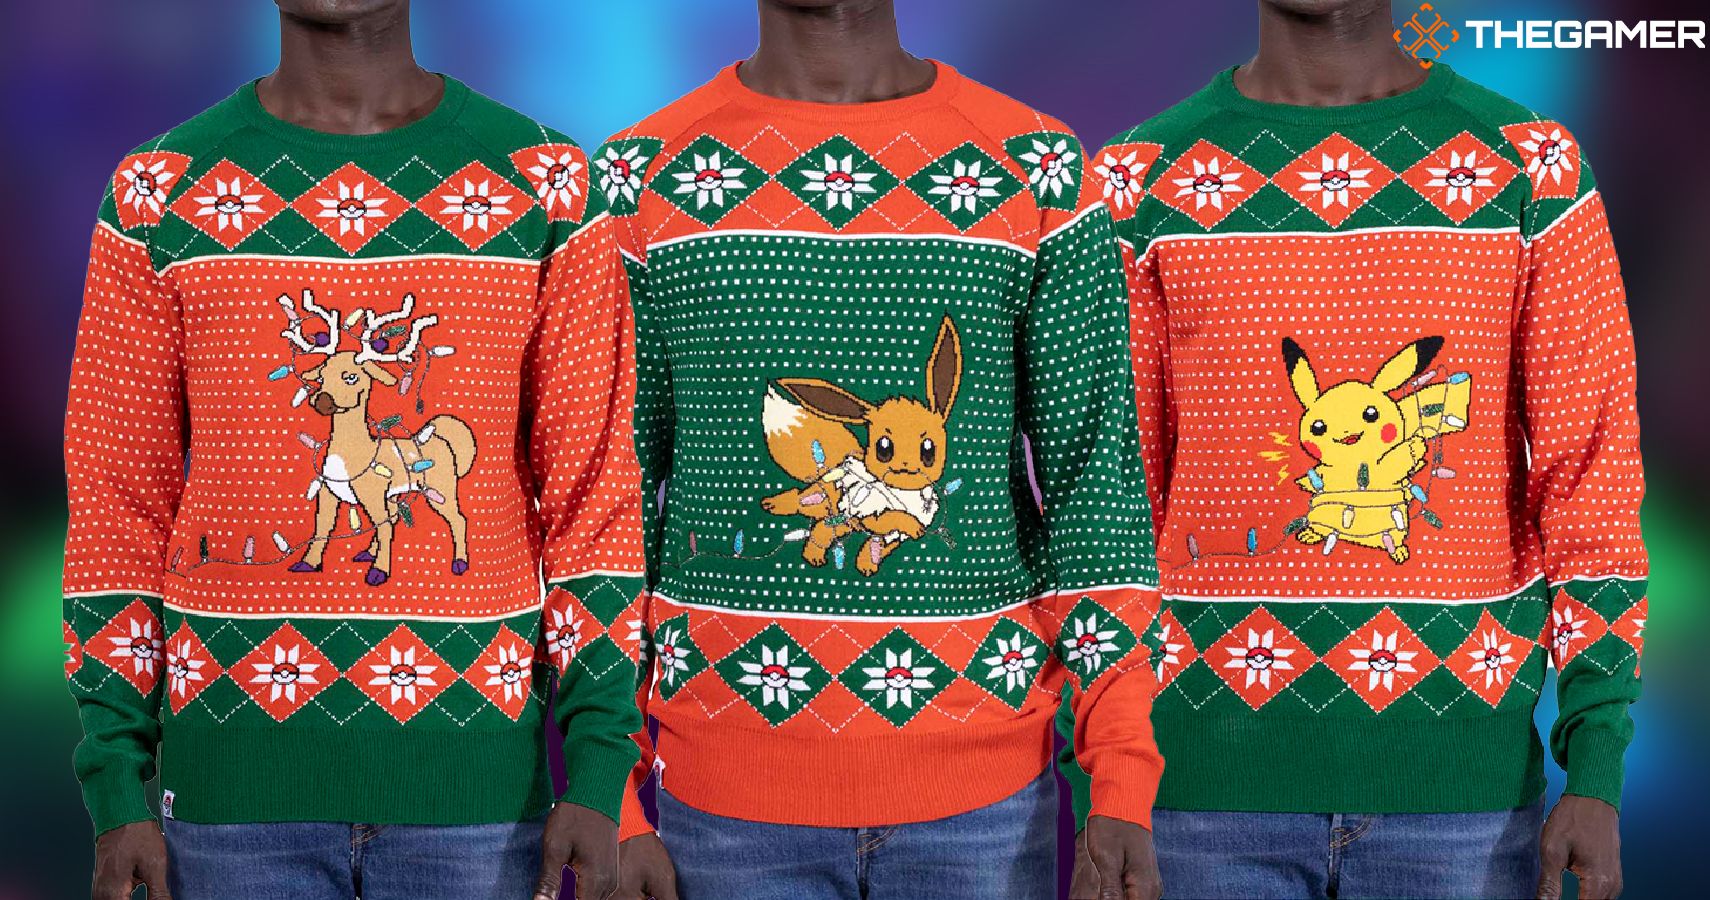 10 Perfect Holiday Gift Ideas For Pokemon Fans